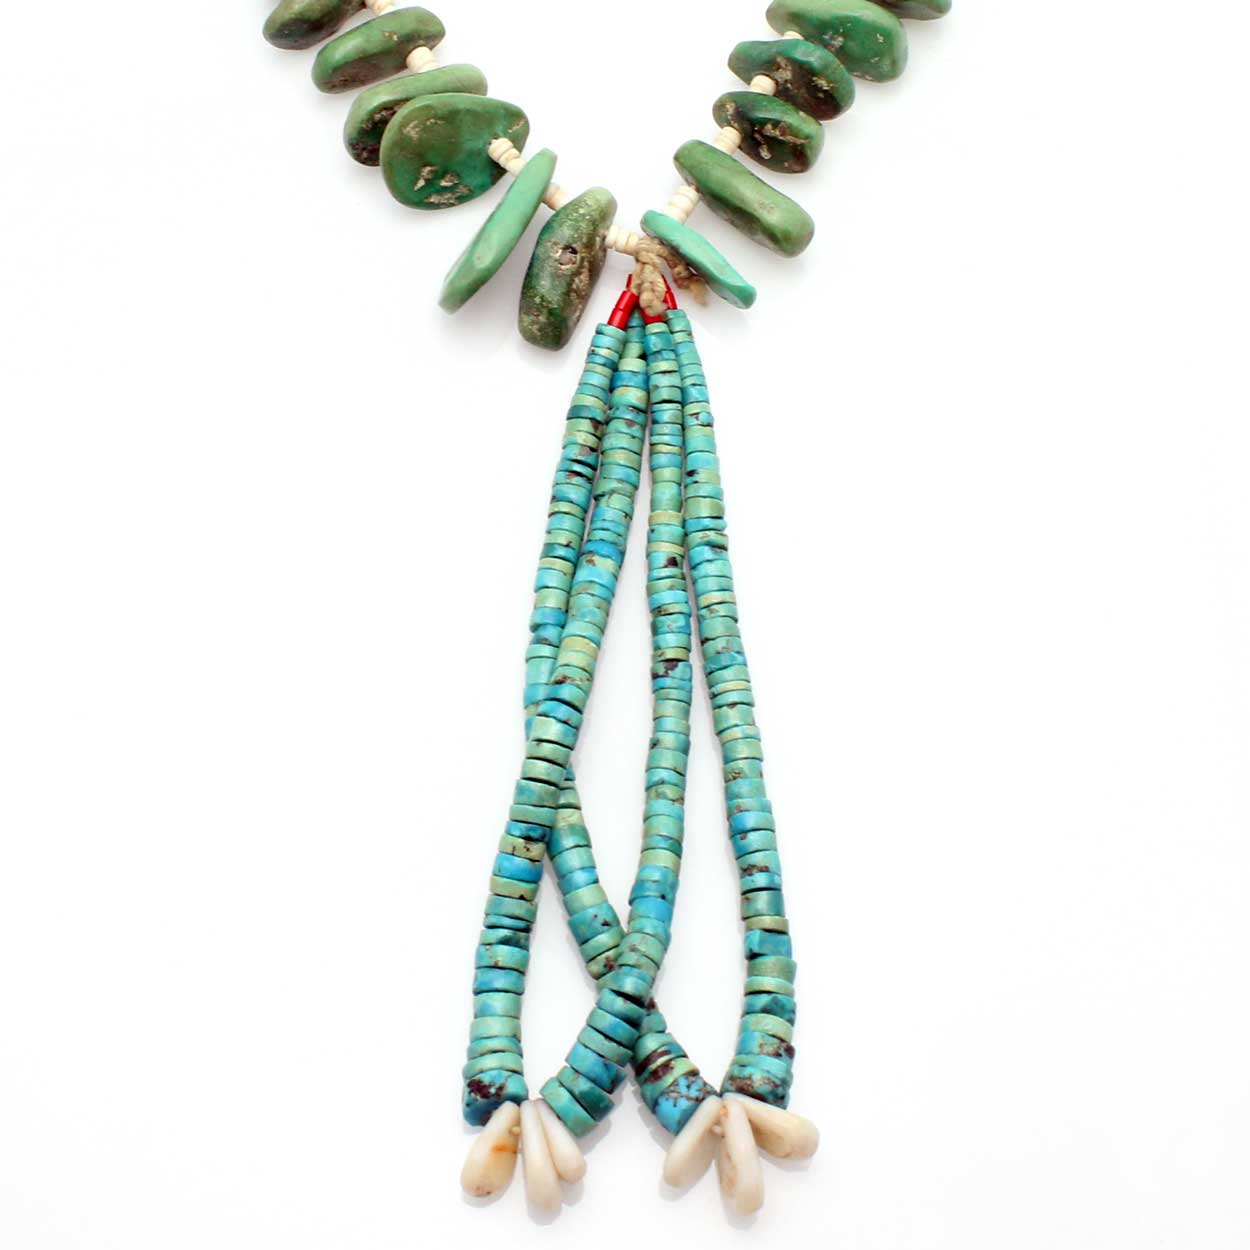 Turquoise Beads with Jacla